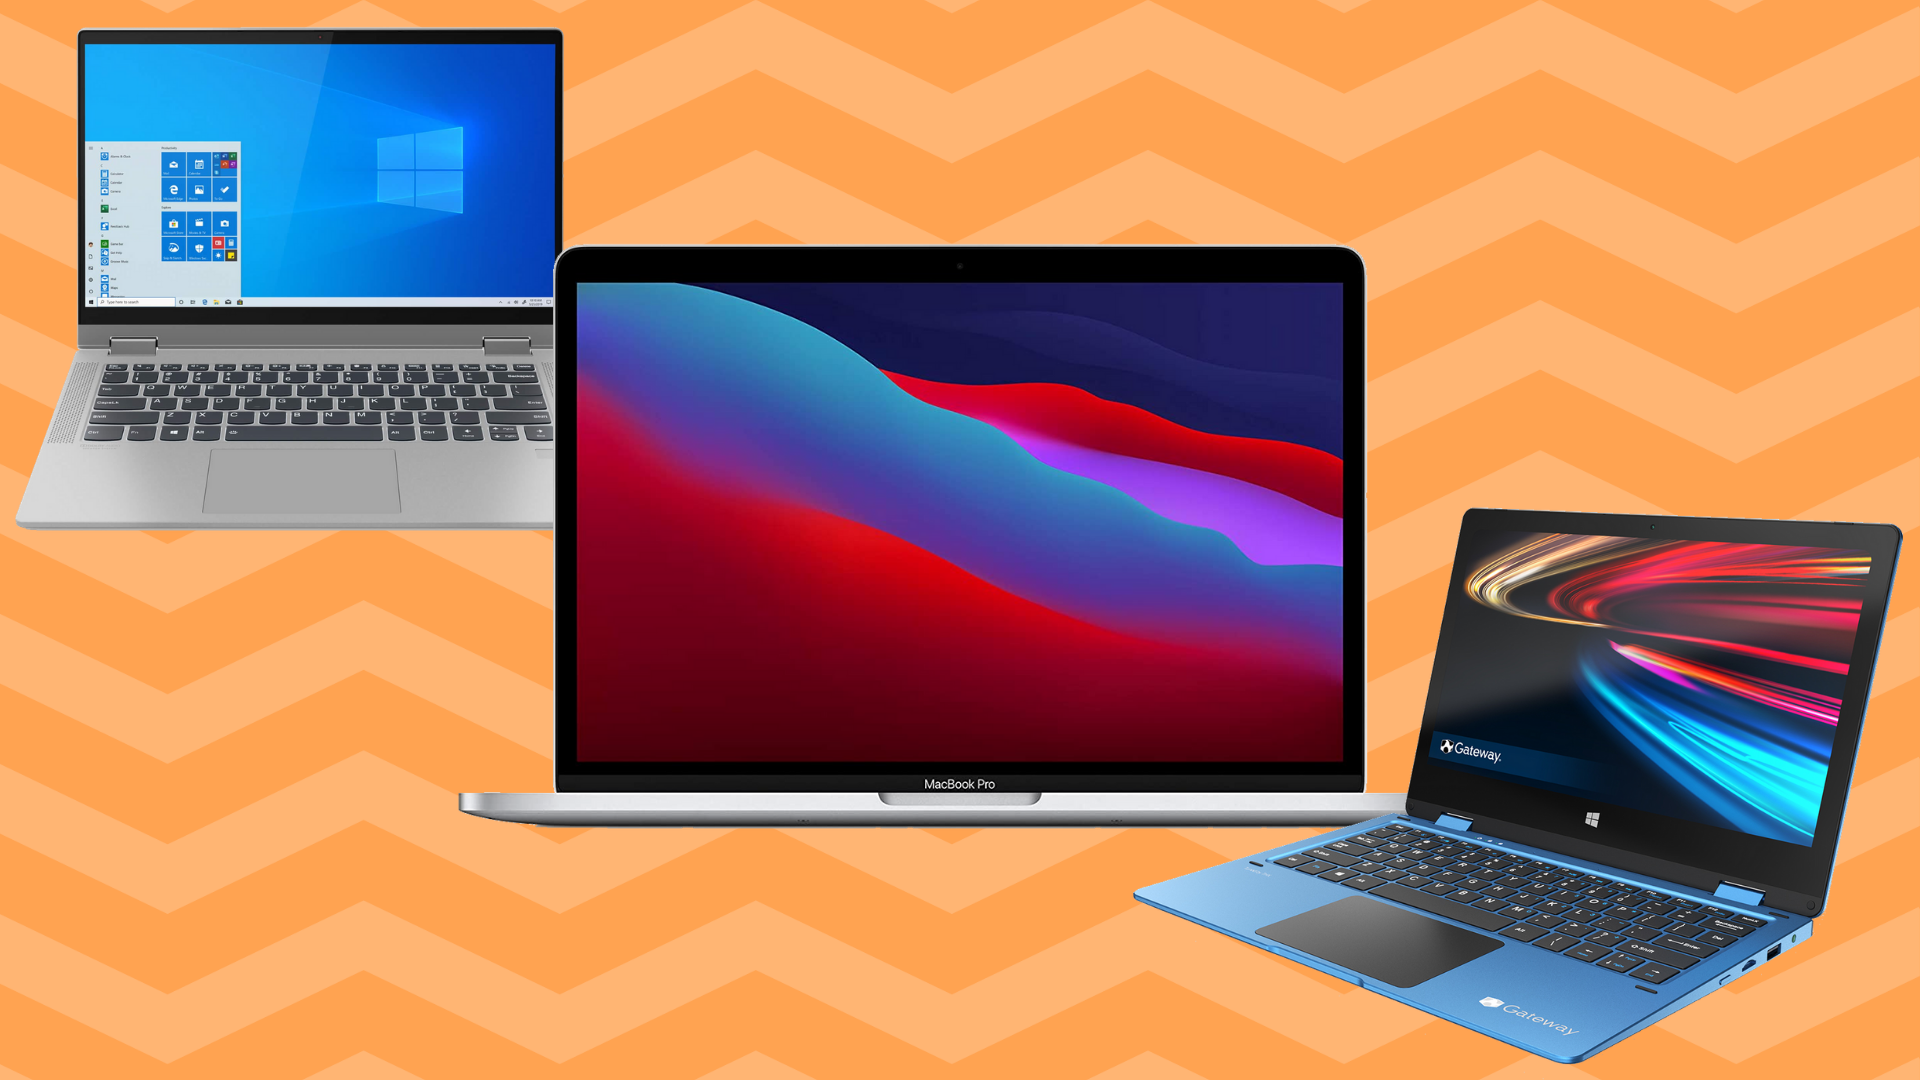 The best laptop deals on the web for MLK Jr. Day